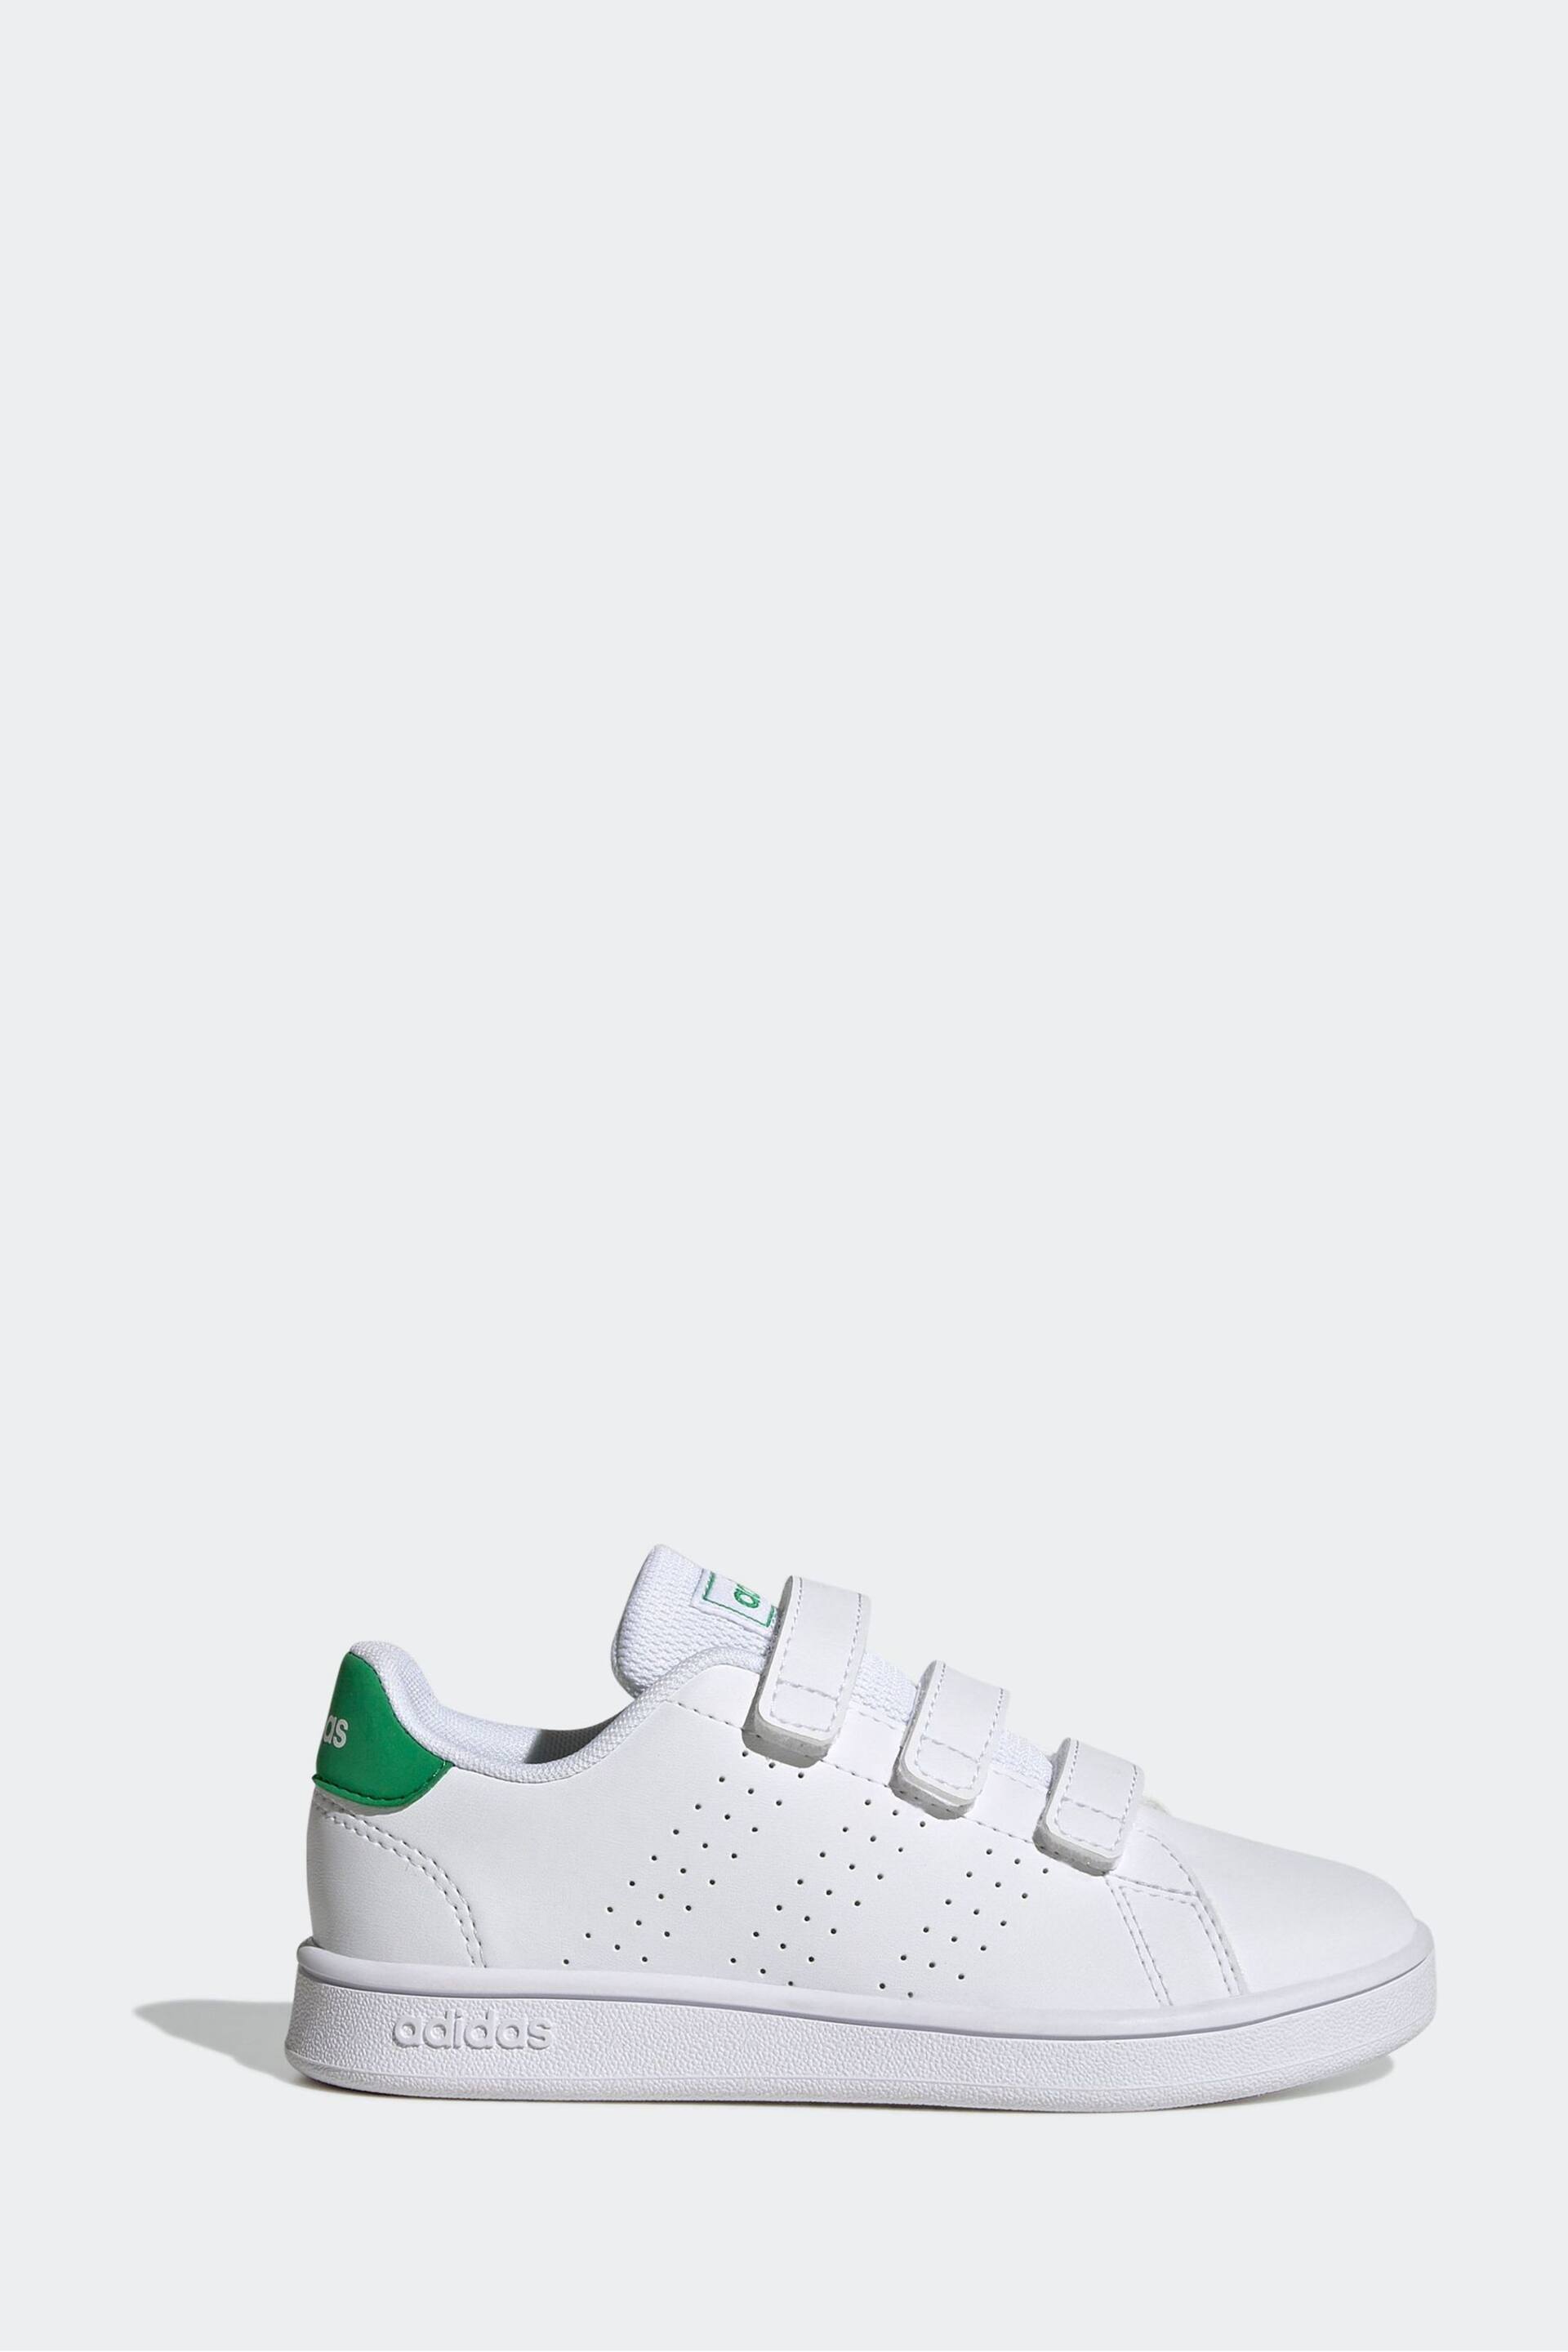 adidas Green/White Sportswear Advantage Court Lifestyle Hook And Loop Trainers - Image 1 of 9